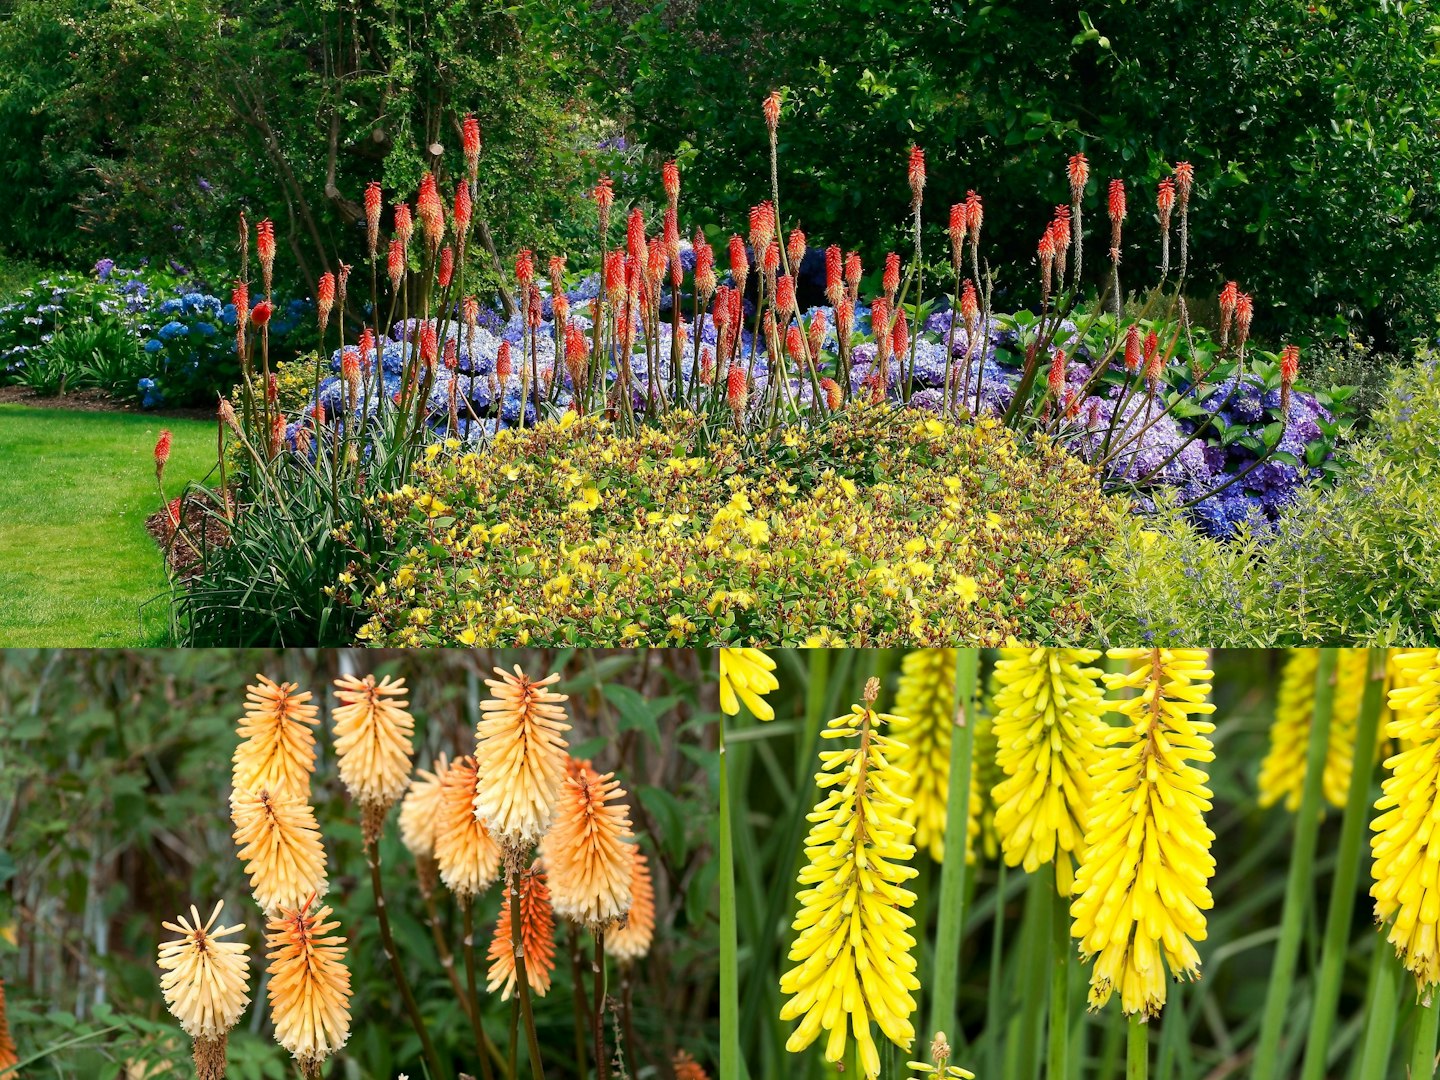 Kniphofia - Better Known As Red-Hot Pokers - Will Enliven Your Garden 